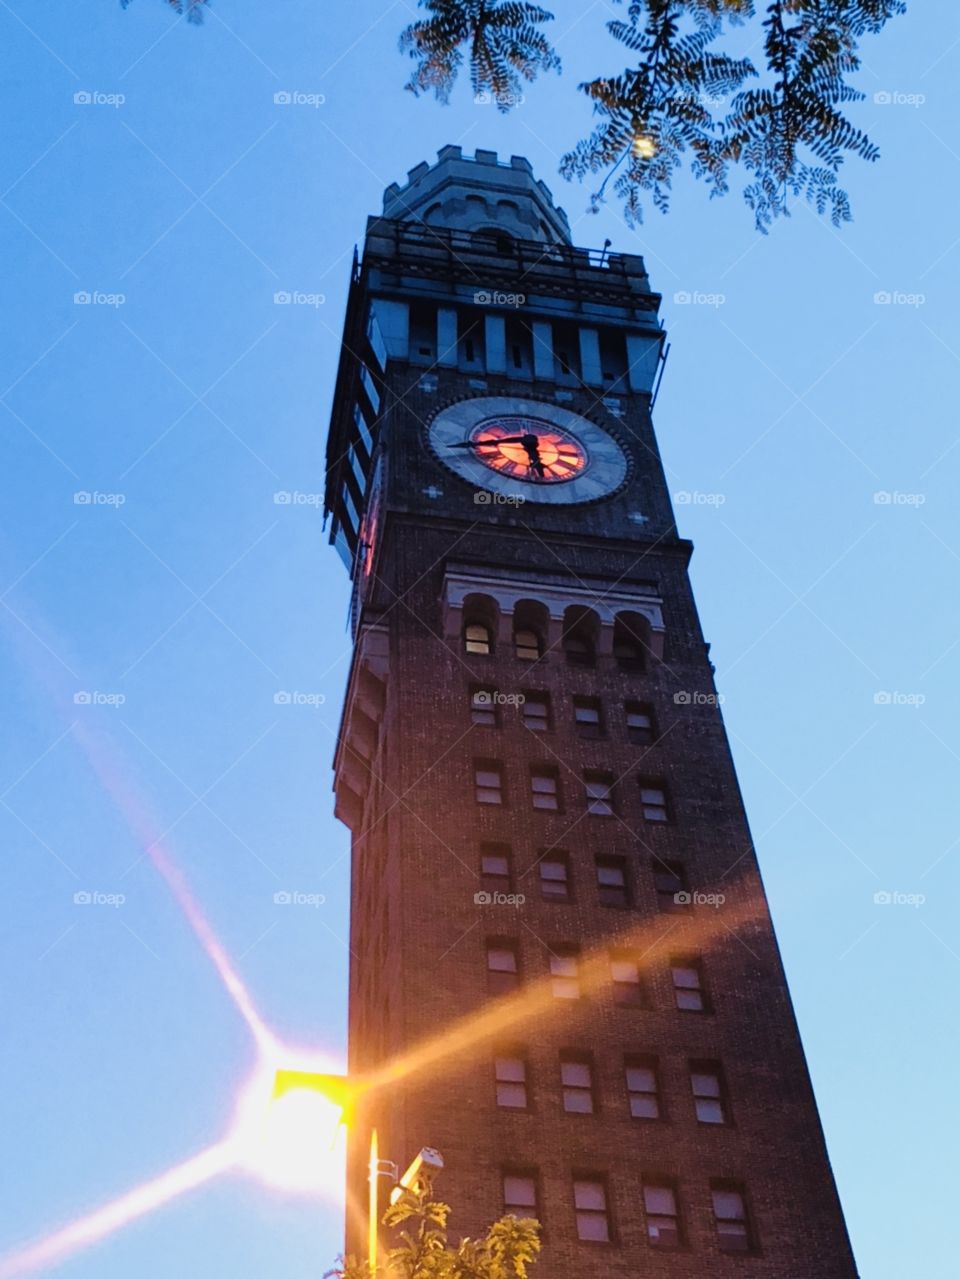 Emerson Bromo-Seltzer Tower: Spectacular, standing strong in Baltimore, Maryland.